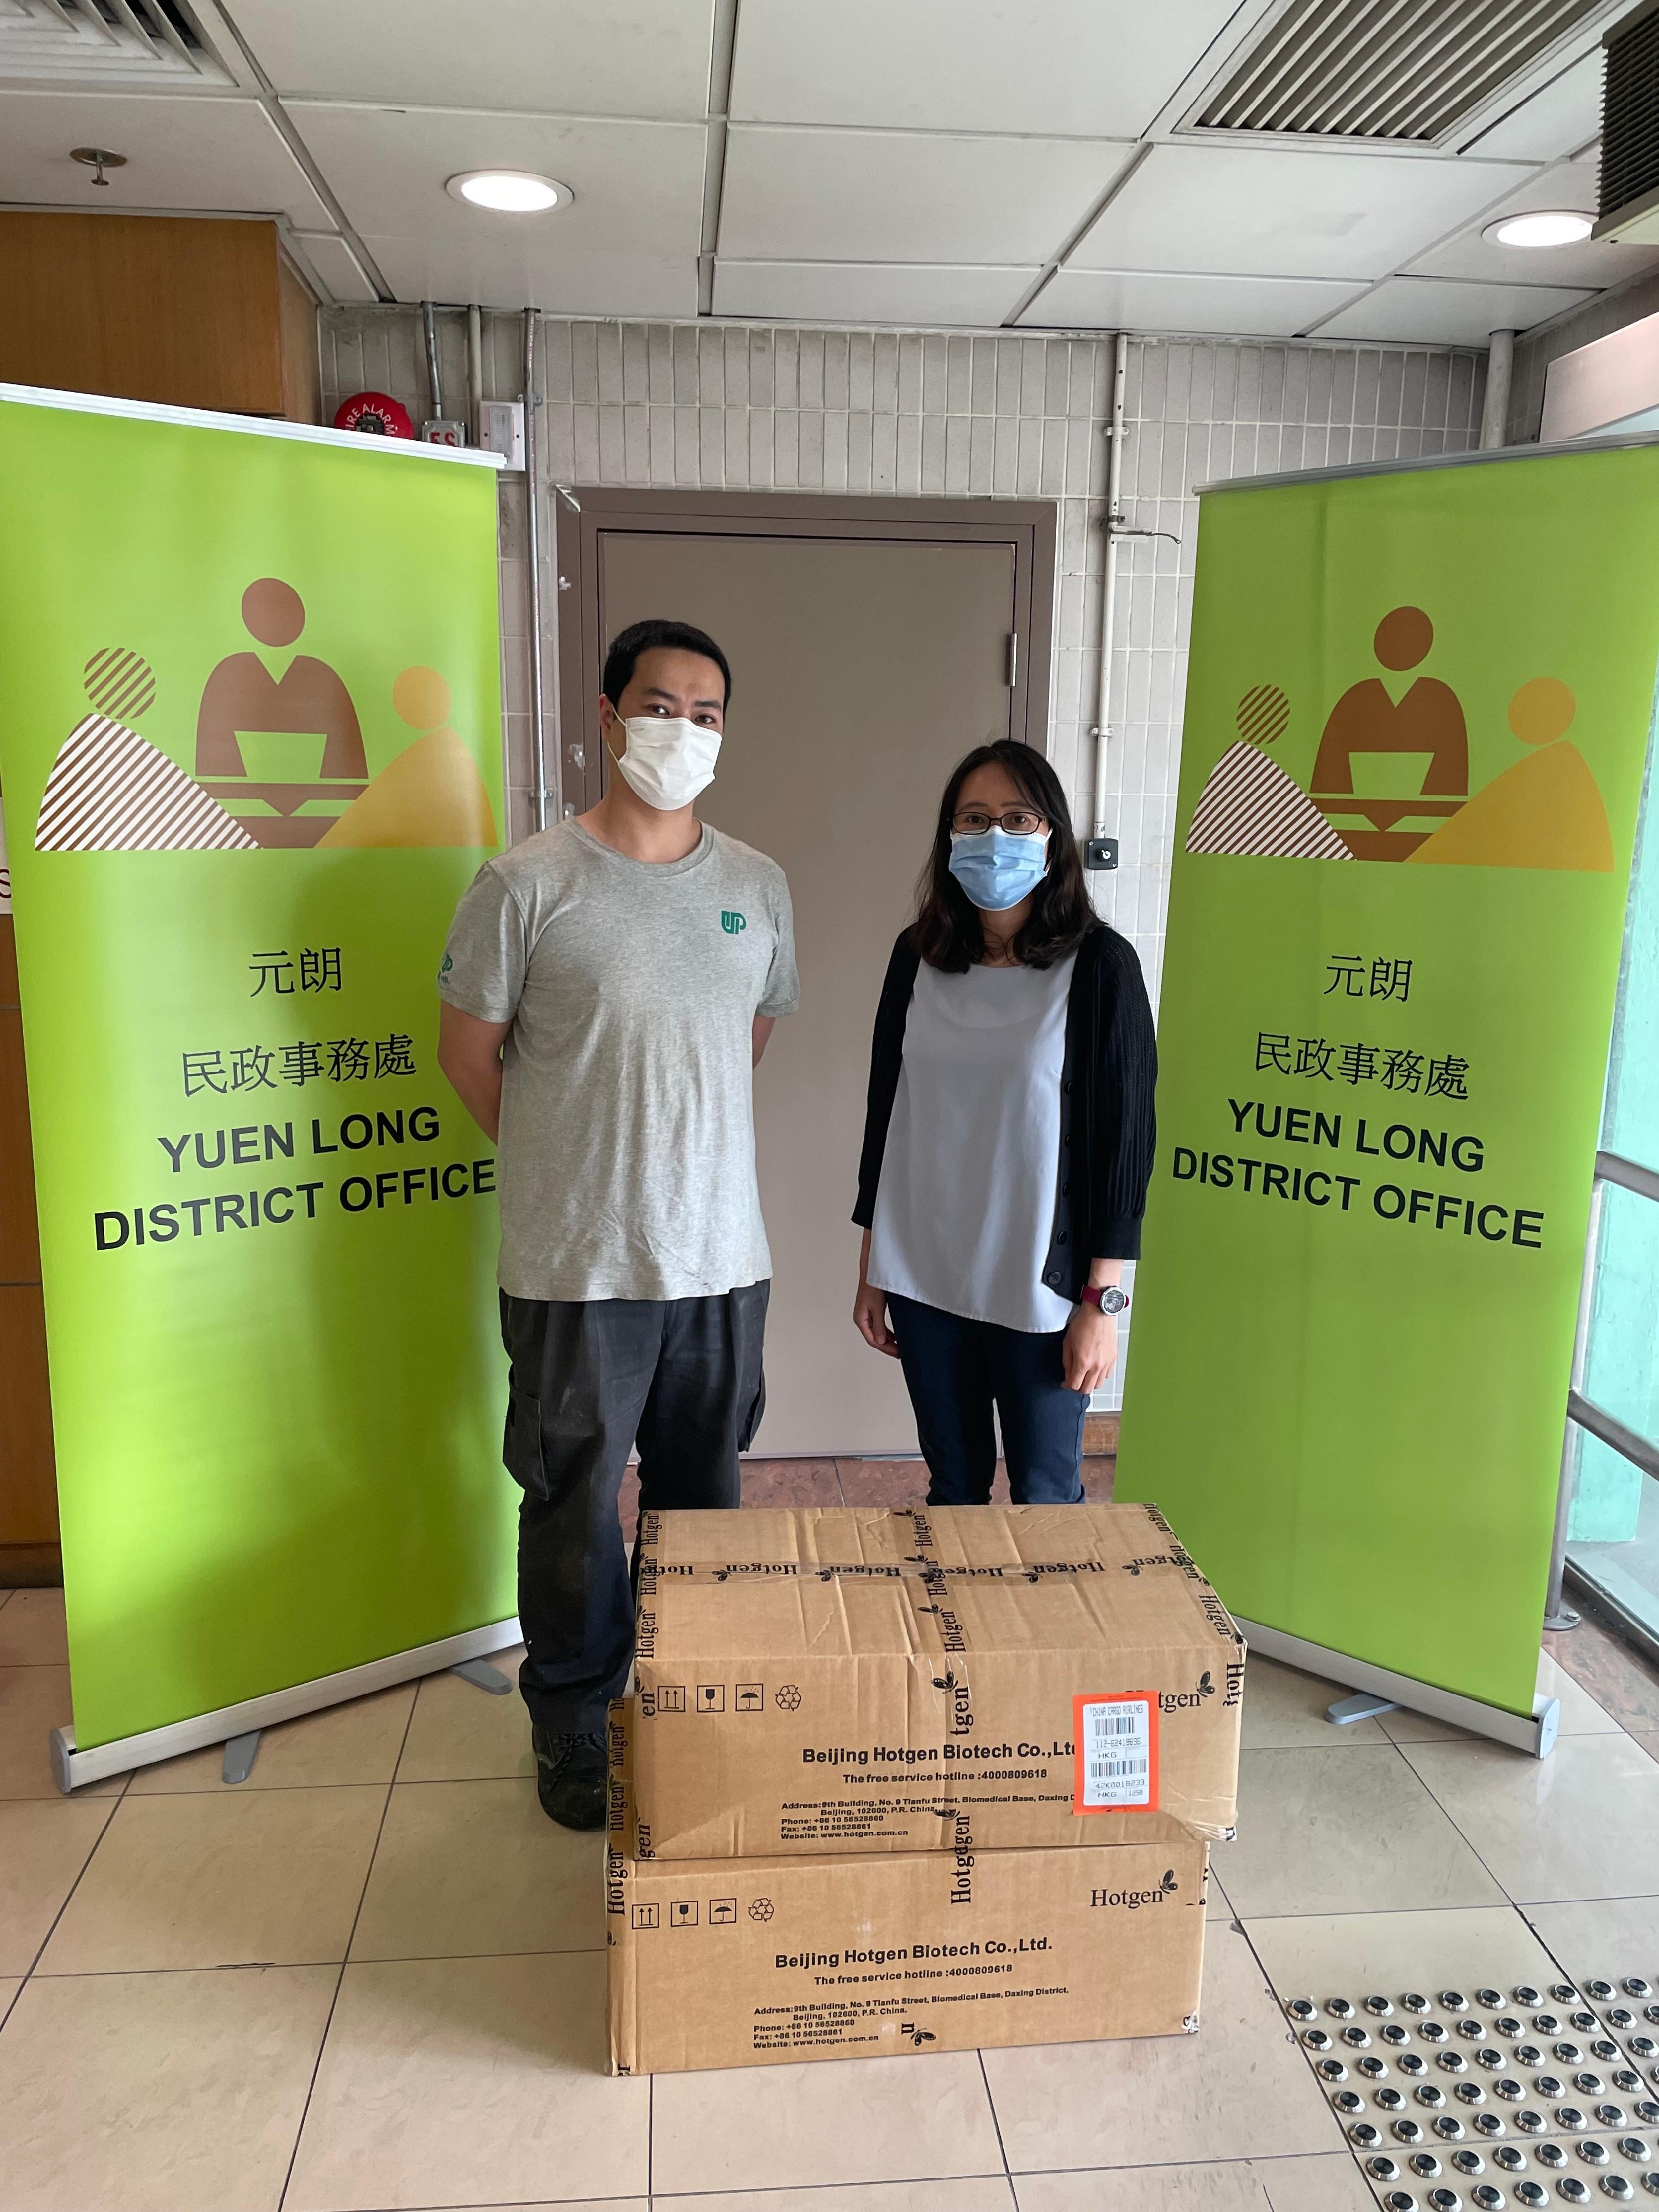 The Yuen Long District Office today (March 22) distributed COVID-19 rapid test kits to households, cleansing workers and property management staff living and working in Tin Yau Court for voluntary testing through the property management company.